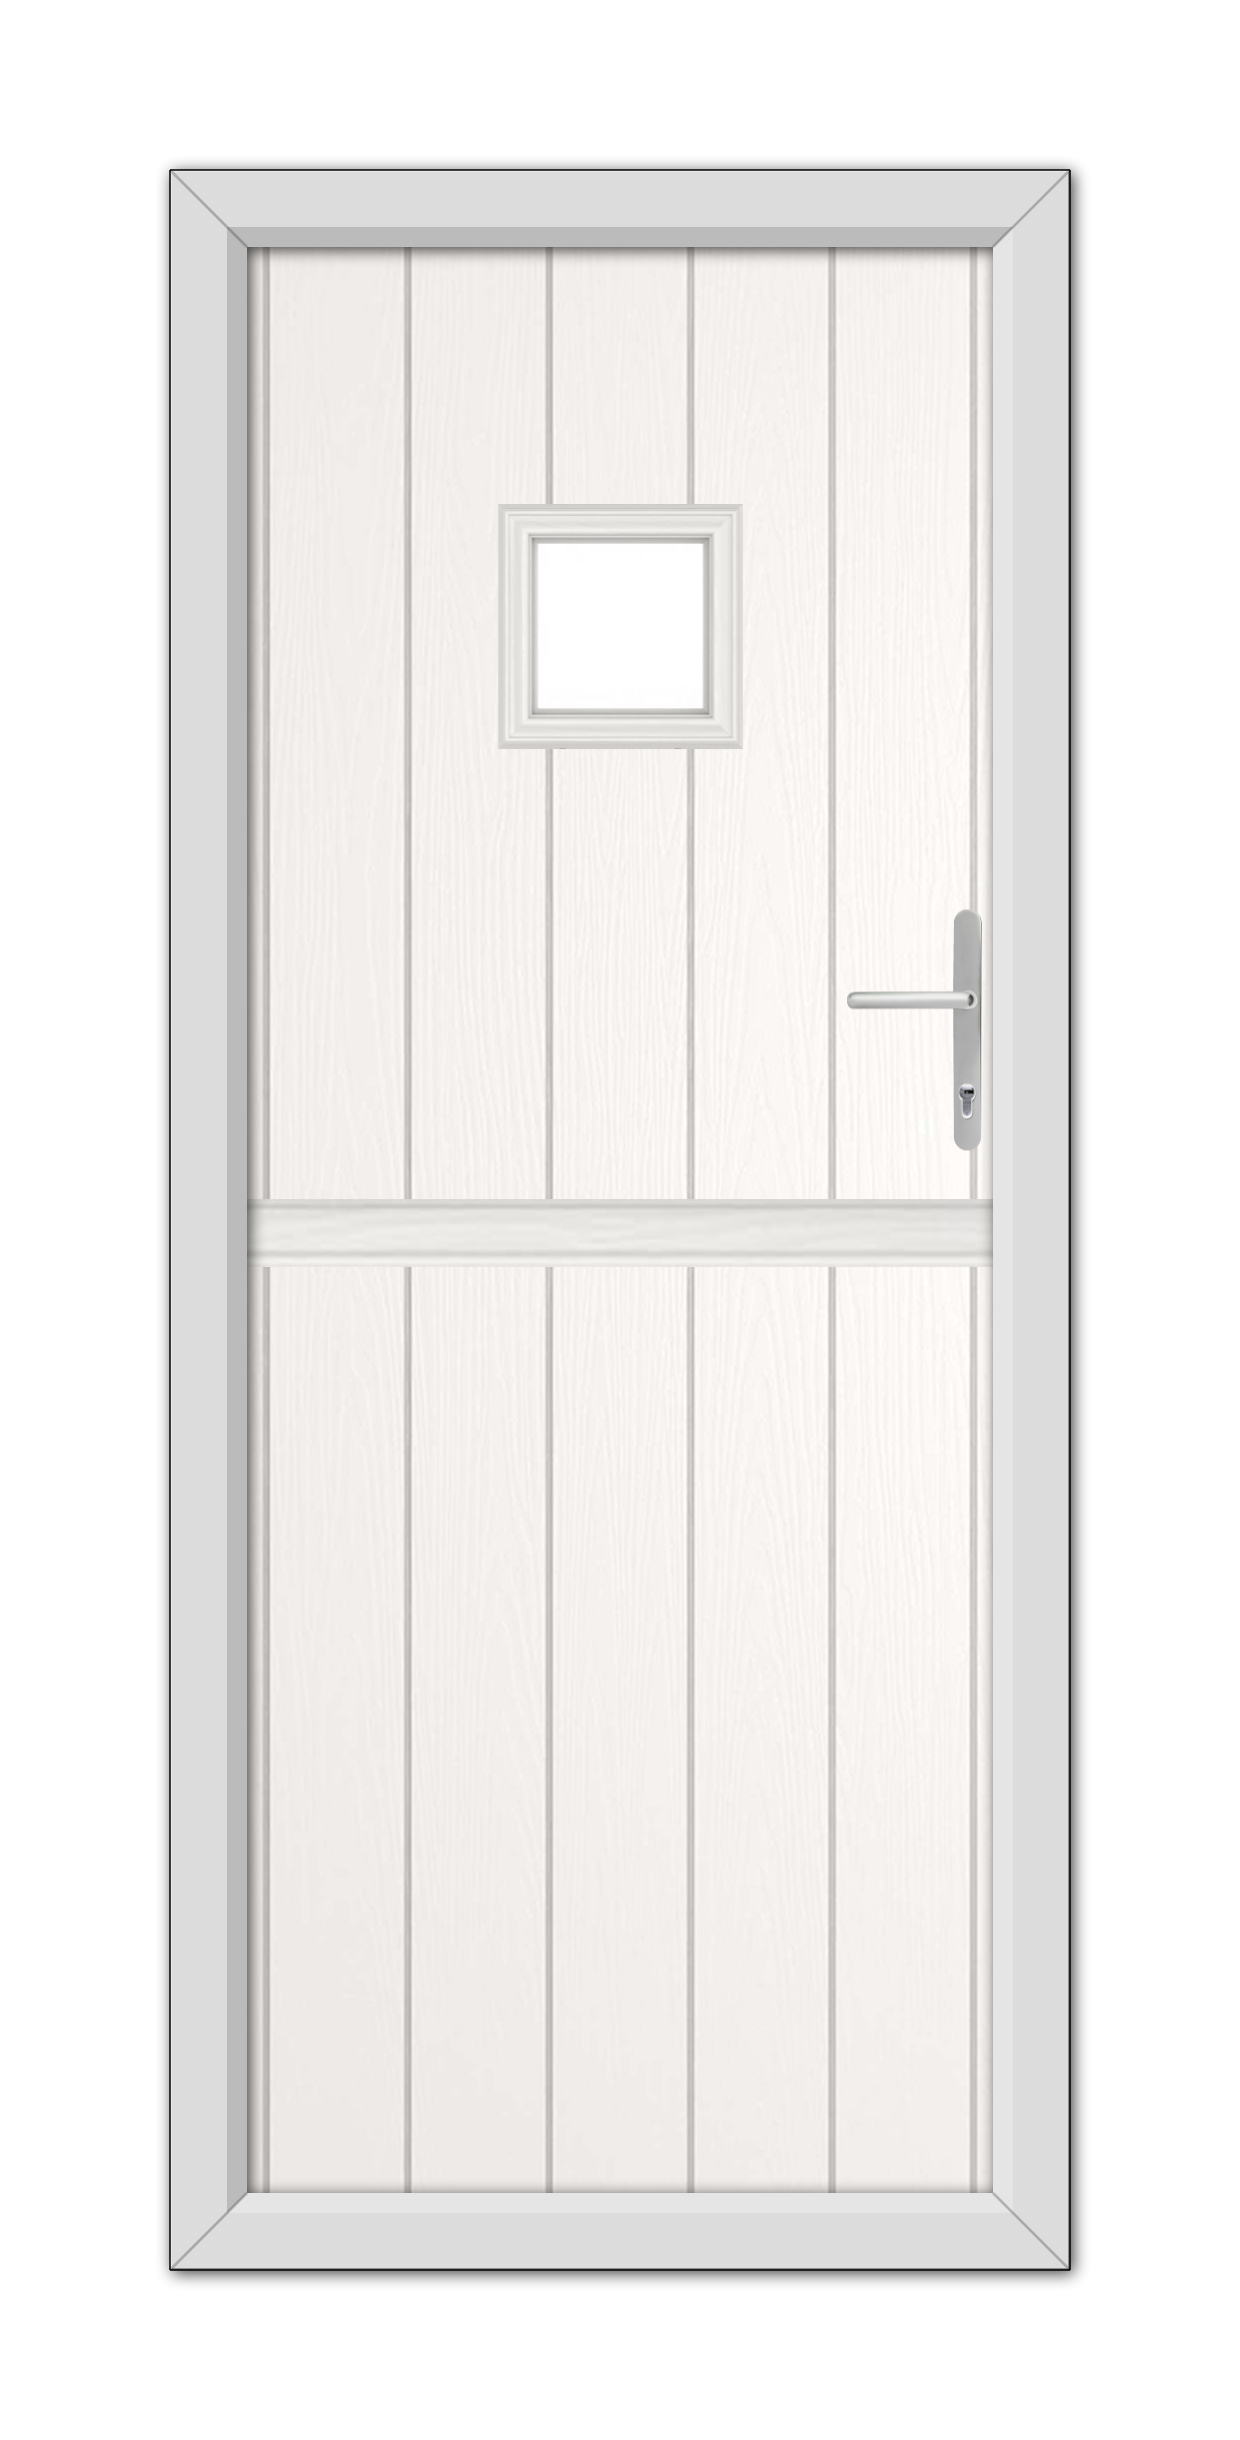 A modern White Brampton Stable Composite Door 48mm Timber Core with a rectangular window at the top, featuring a metal handle on the right side.